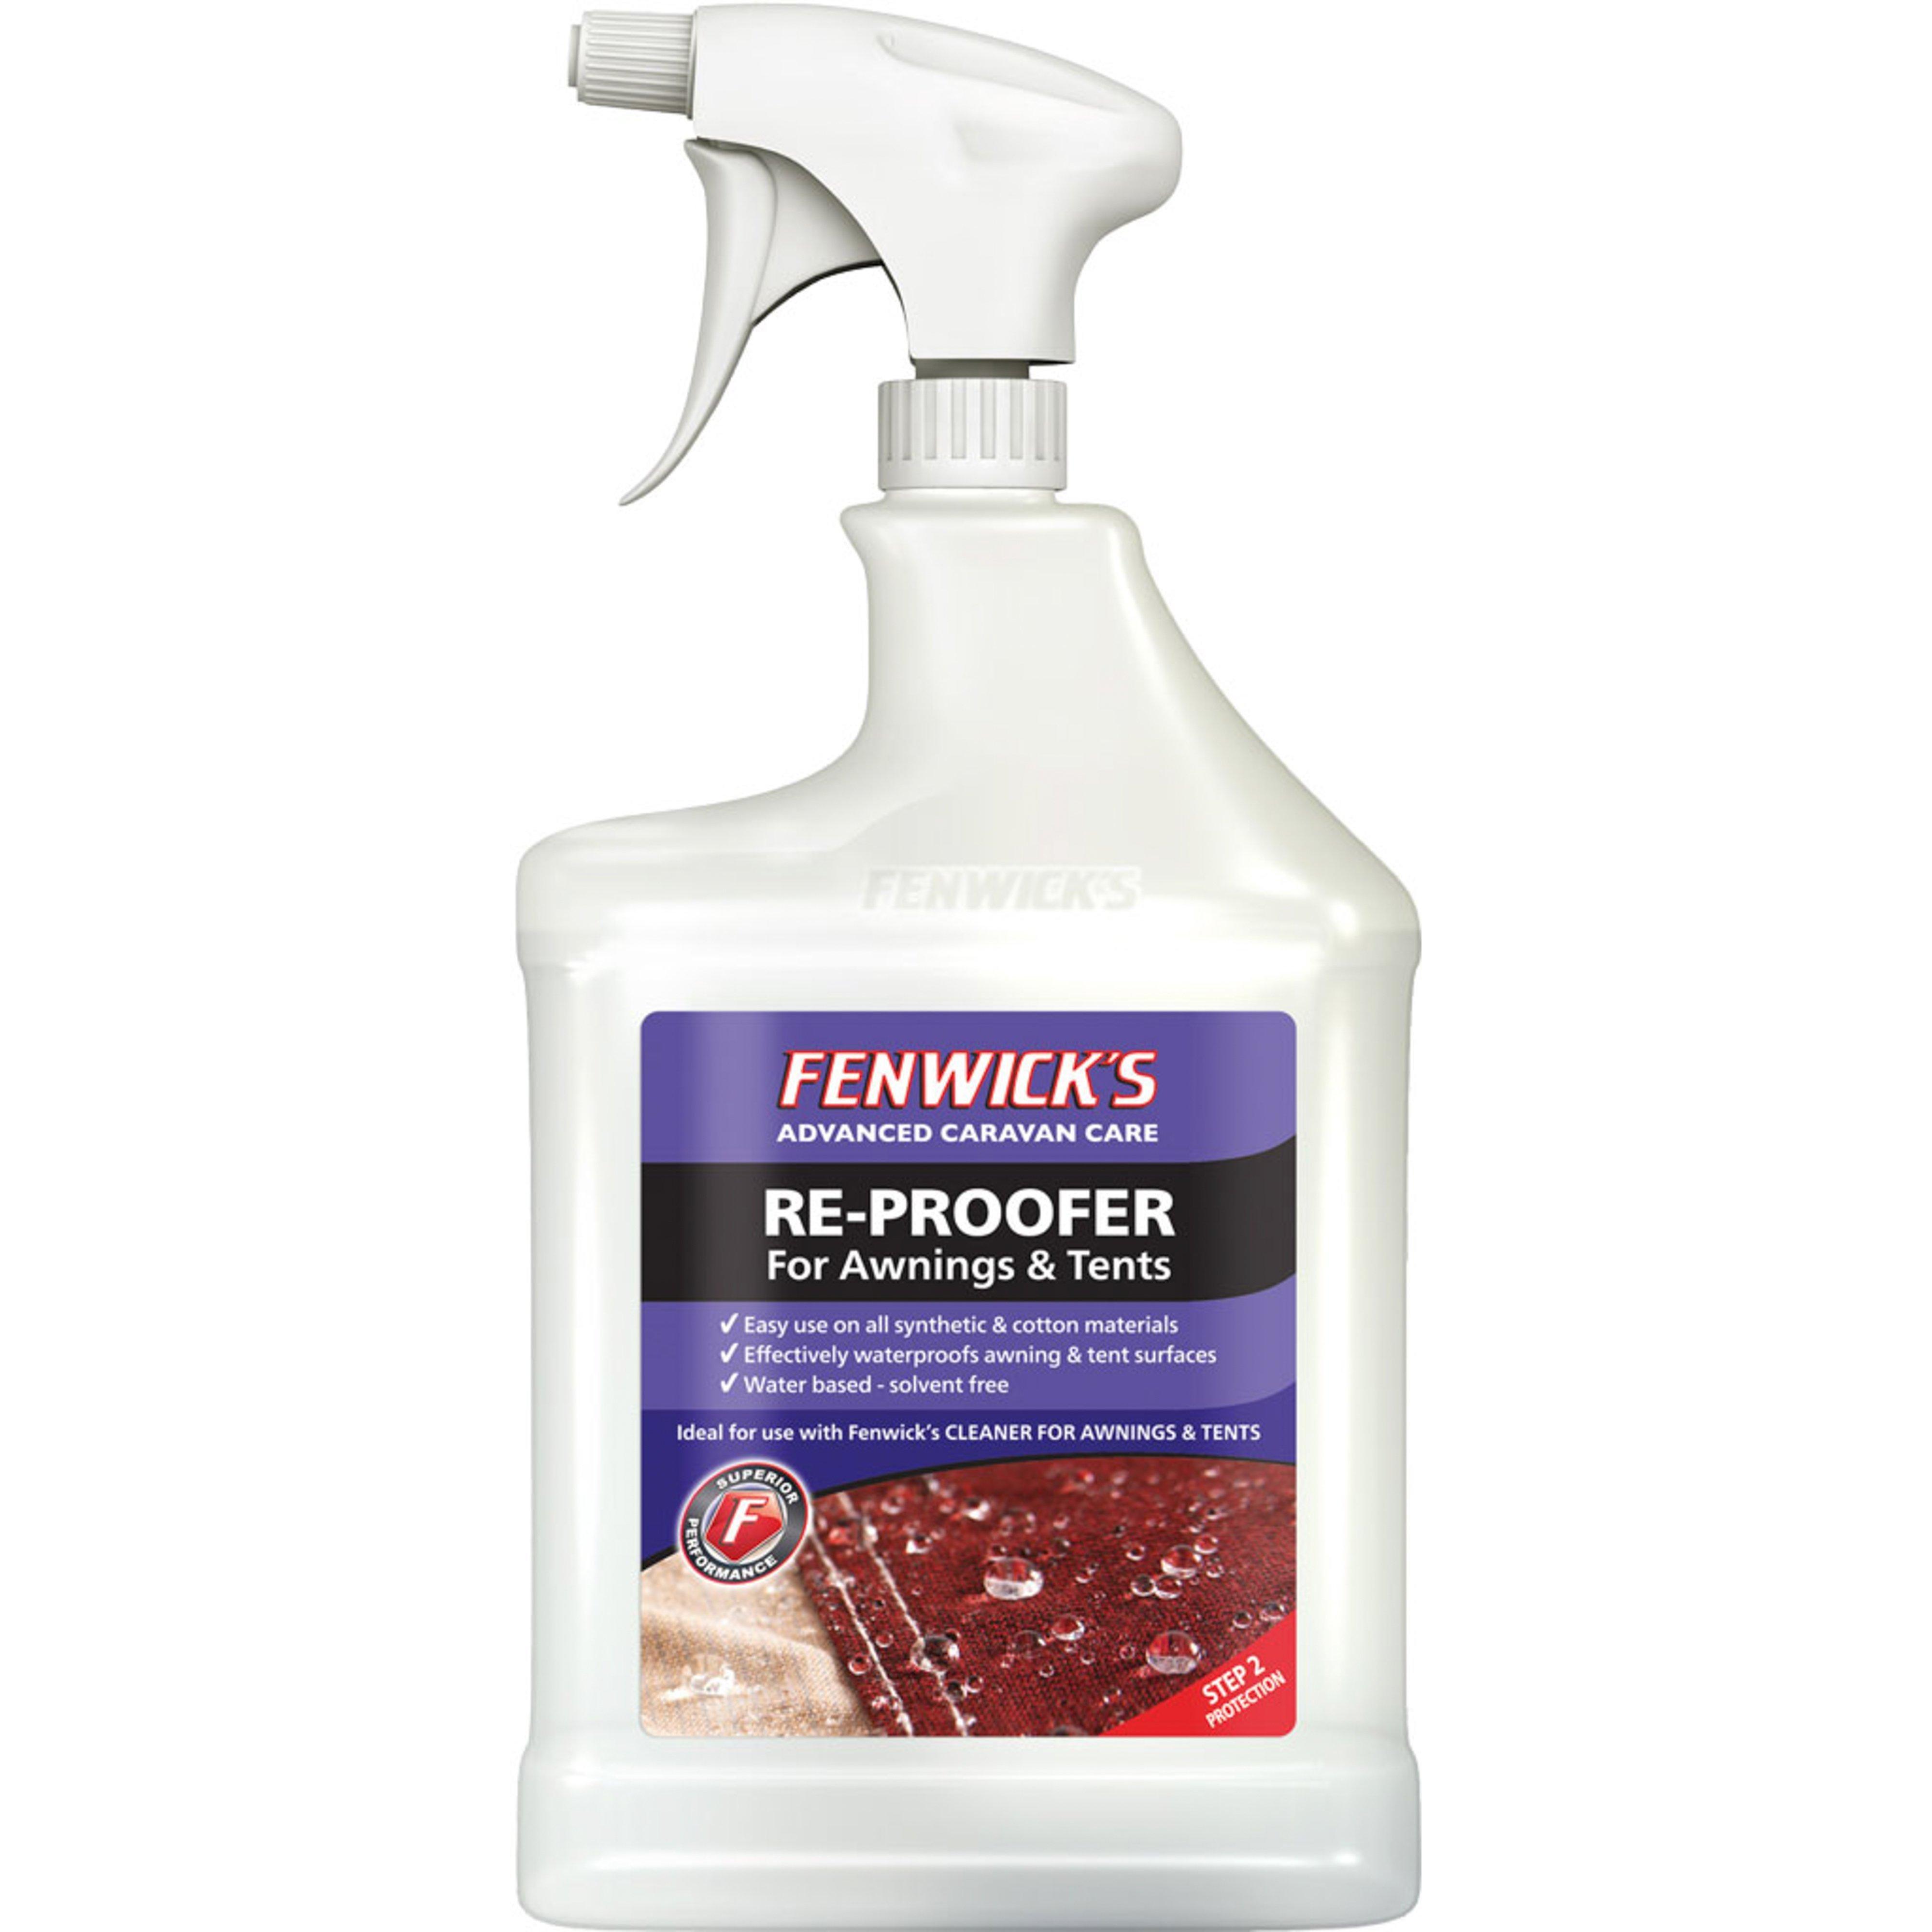 Fenwicks Reproofer for Awnings & Tents (1 Litre) Review